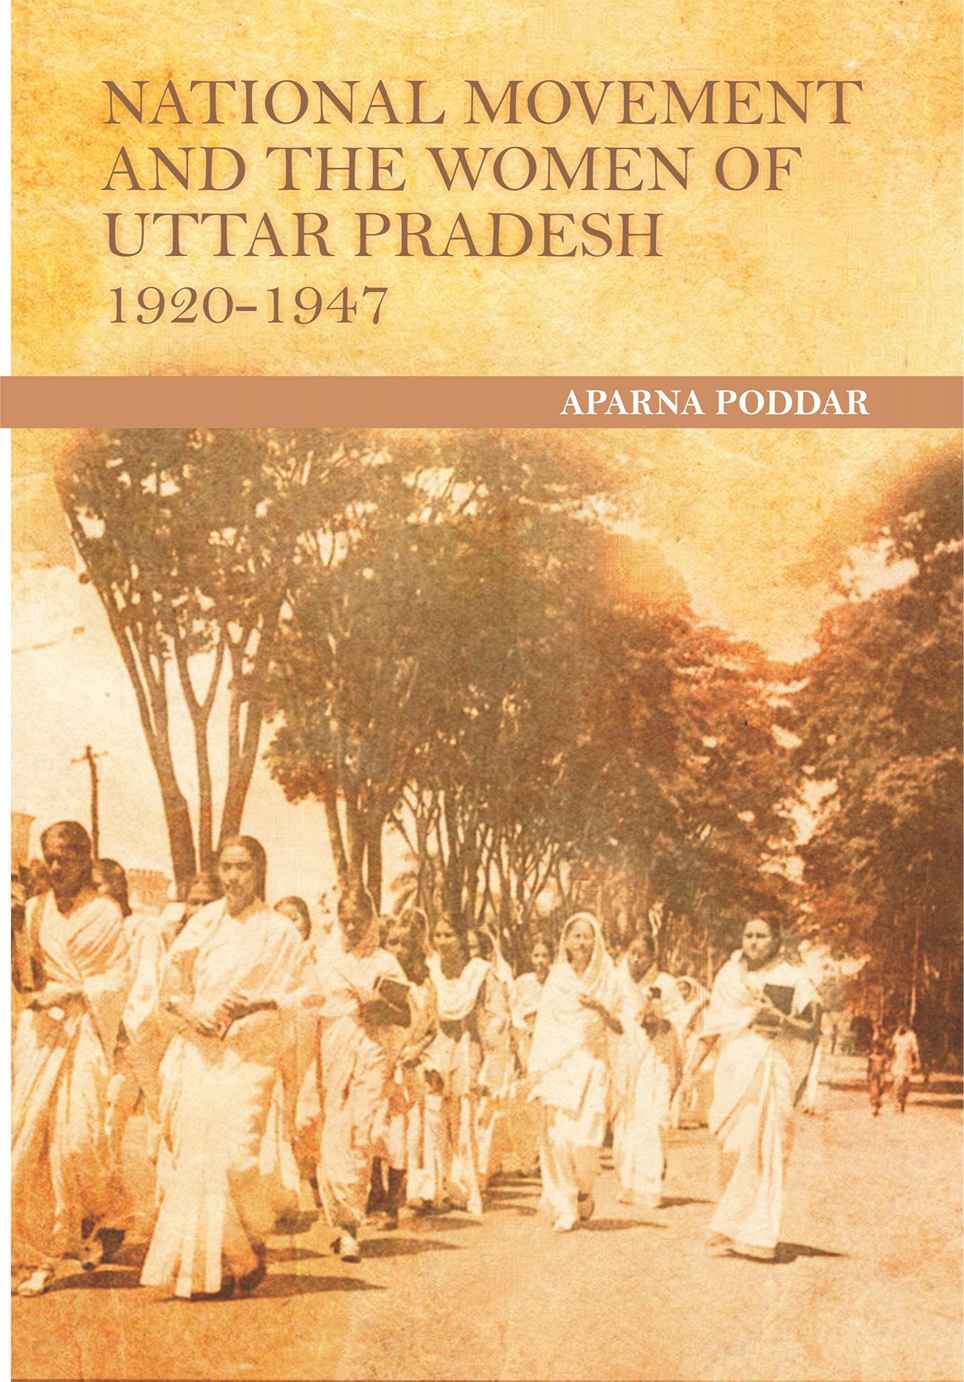 National Movement And The Women Of U.P (1920-1947)